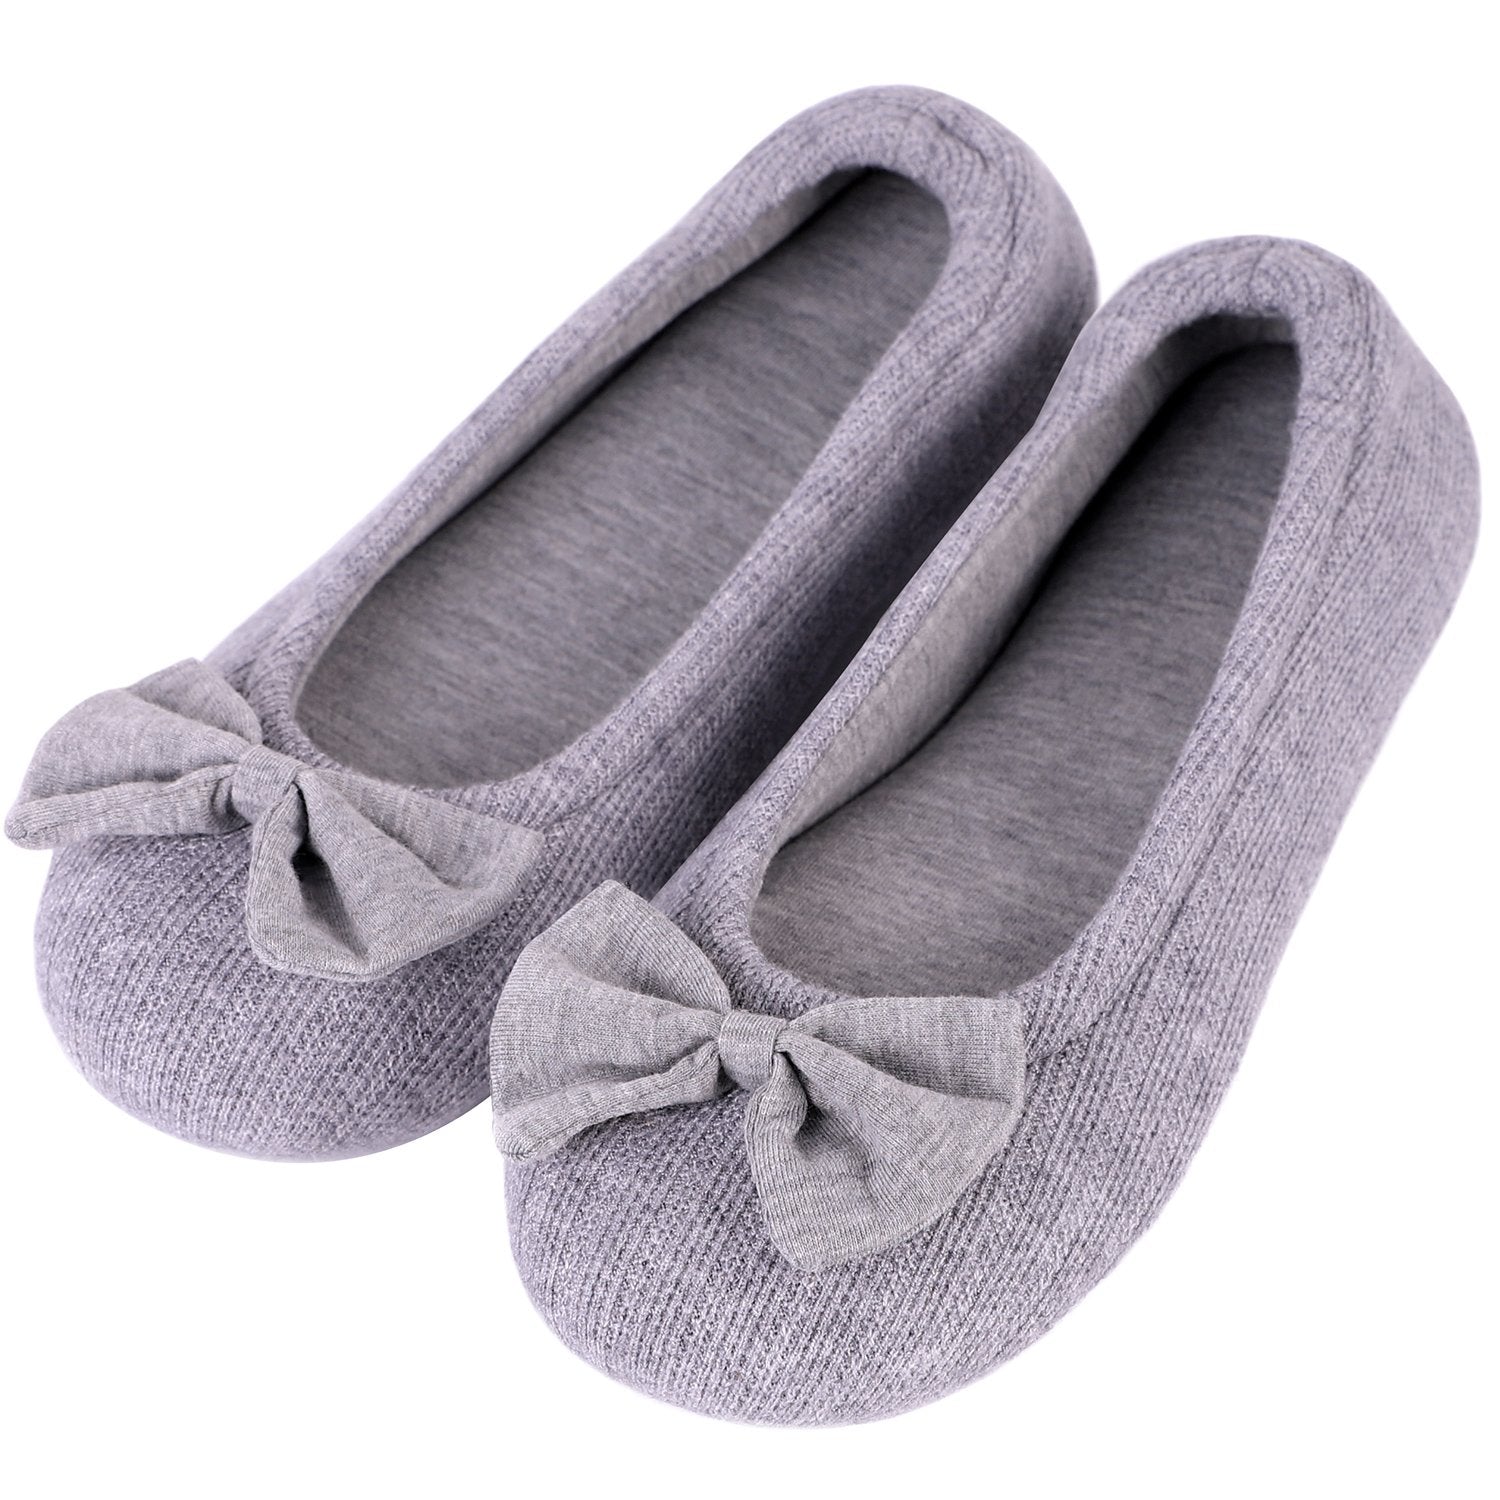 Womens Ballerina Slippers Stretchable